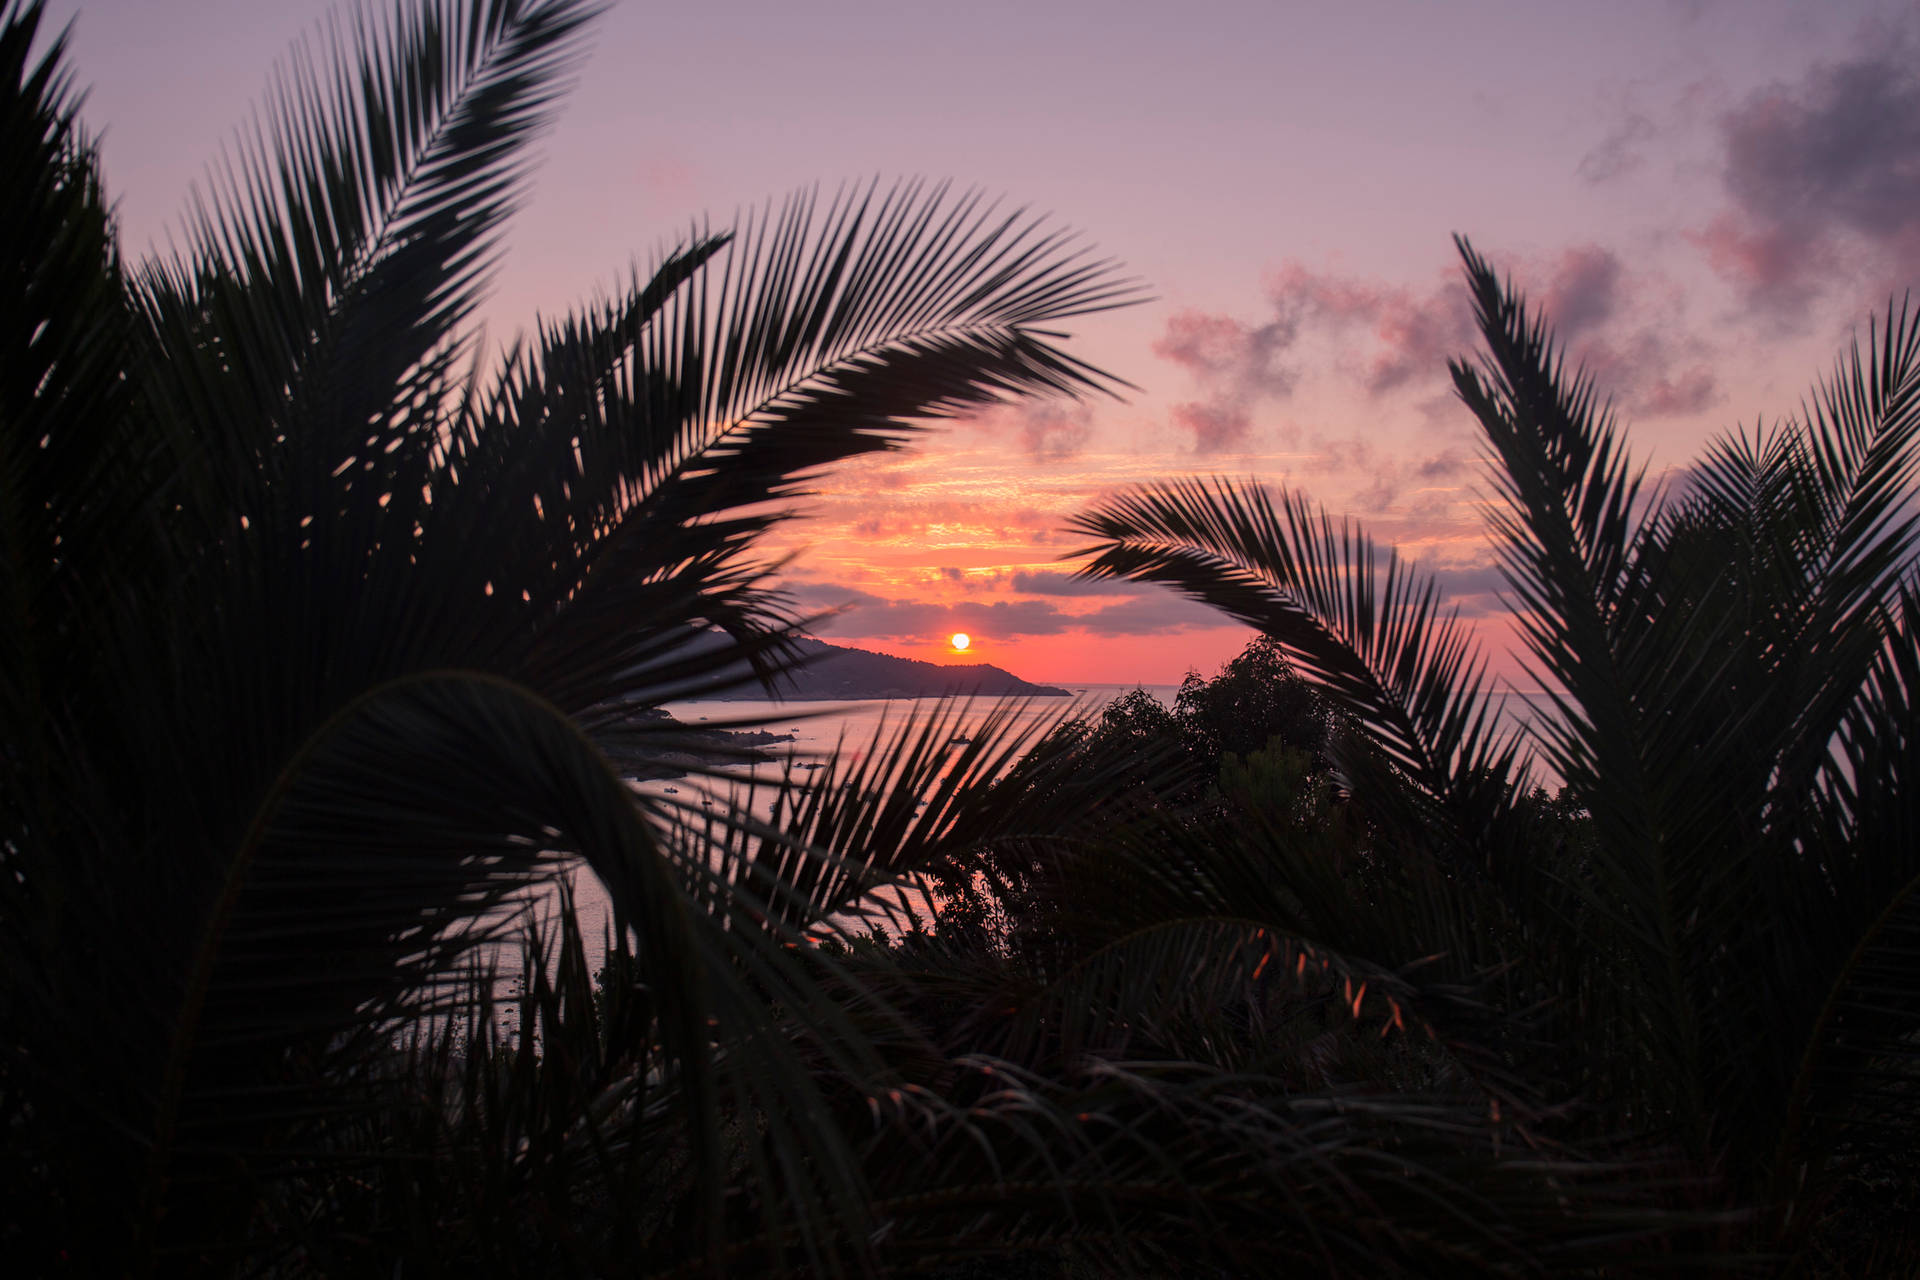 Aesthetic wallpaper of beach sunset with silhouette of palm trees. 